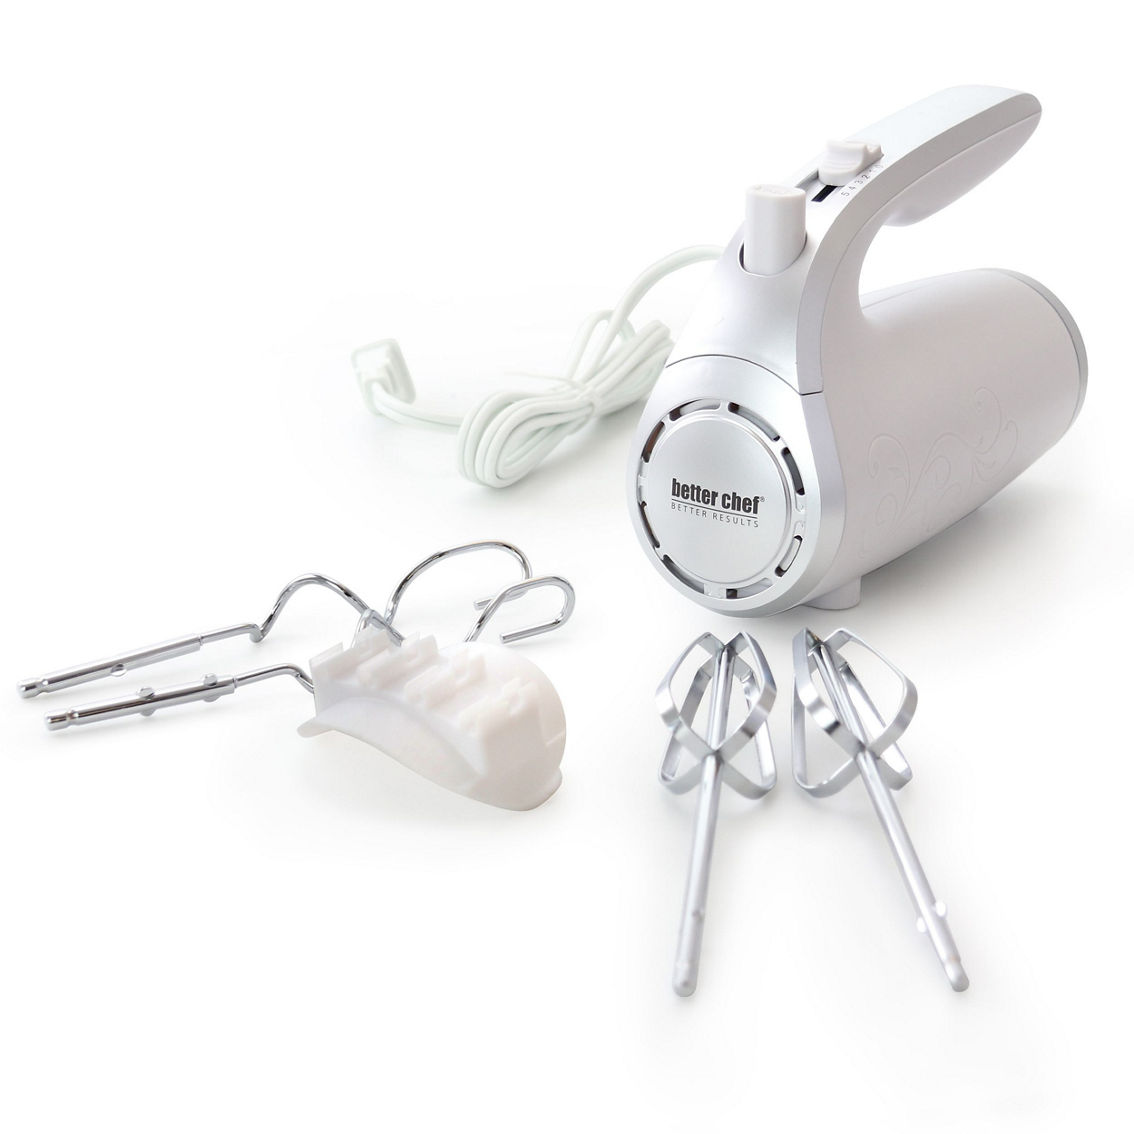 5-Speed 150-Watt Hand Mixer White w/ Silver Accents - Image 5 of 5